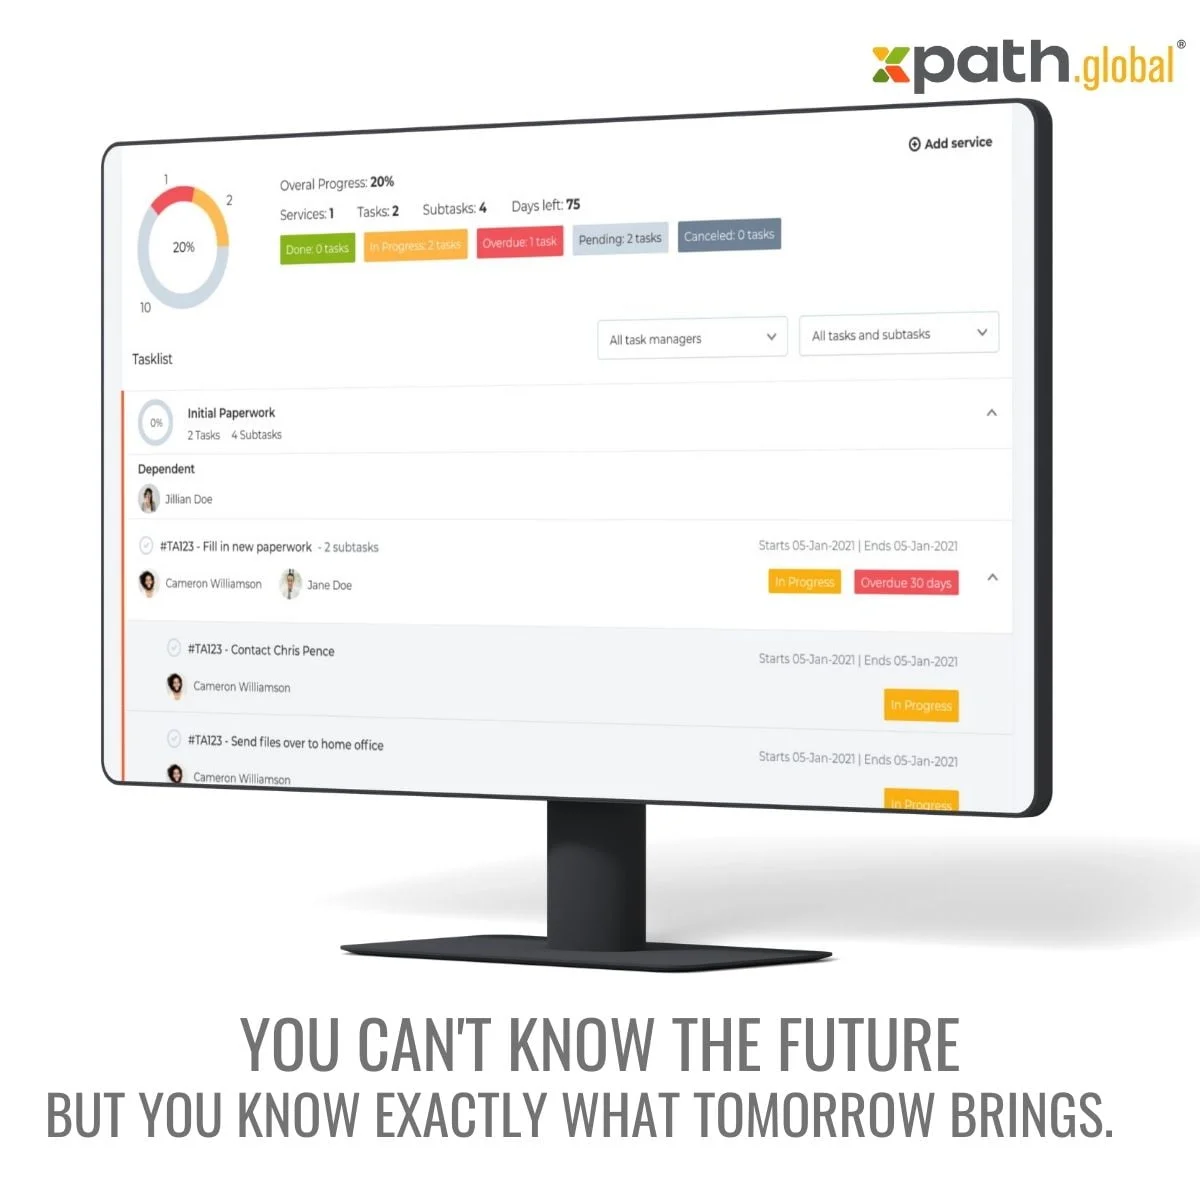 xpath.global digital ecosystem for global mobility industry